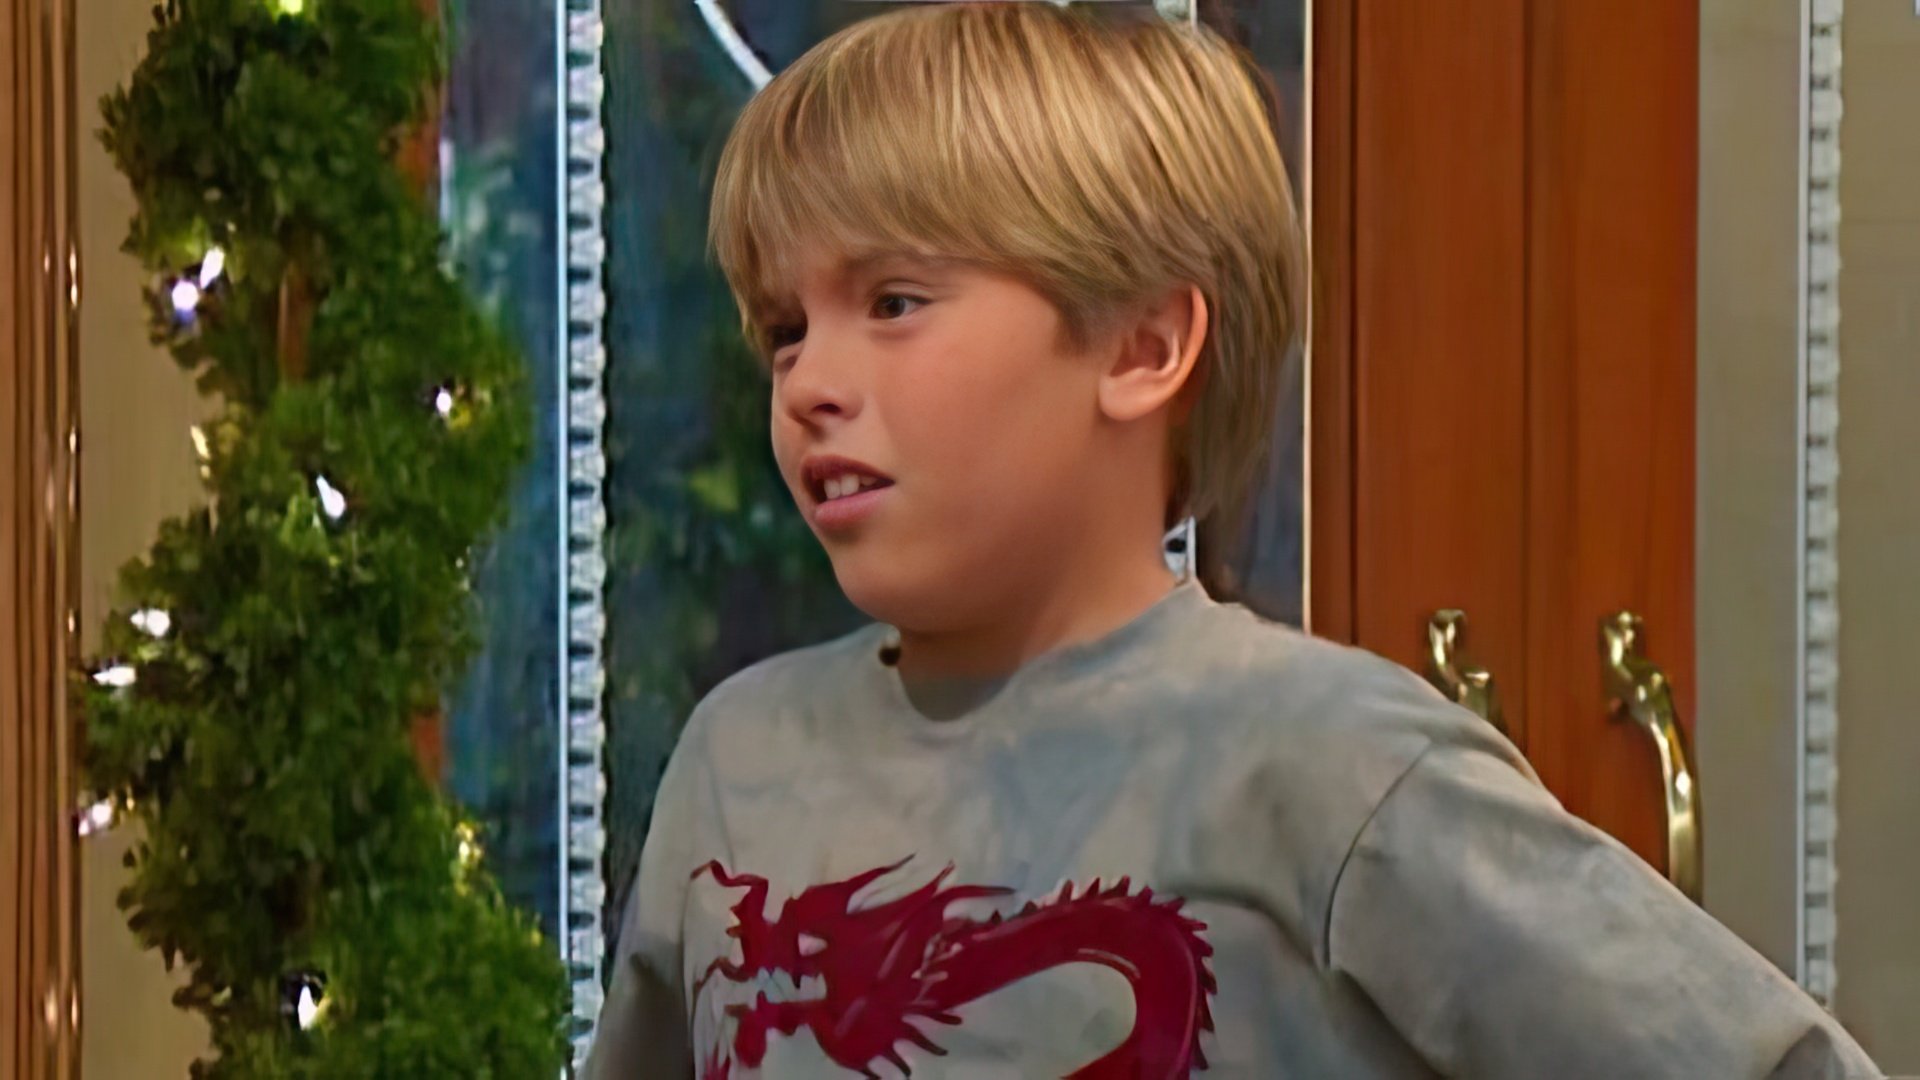 Dylan Sprouse in 'The Suite Life of Zack & Cody'